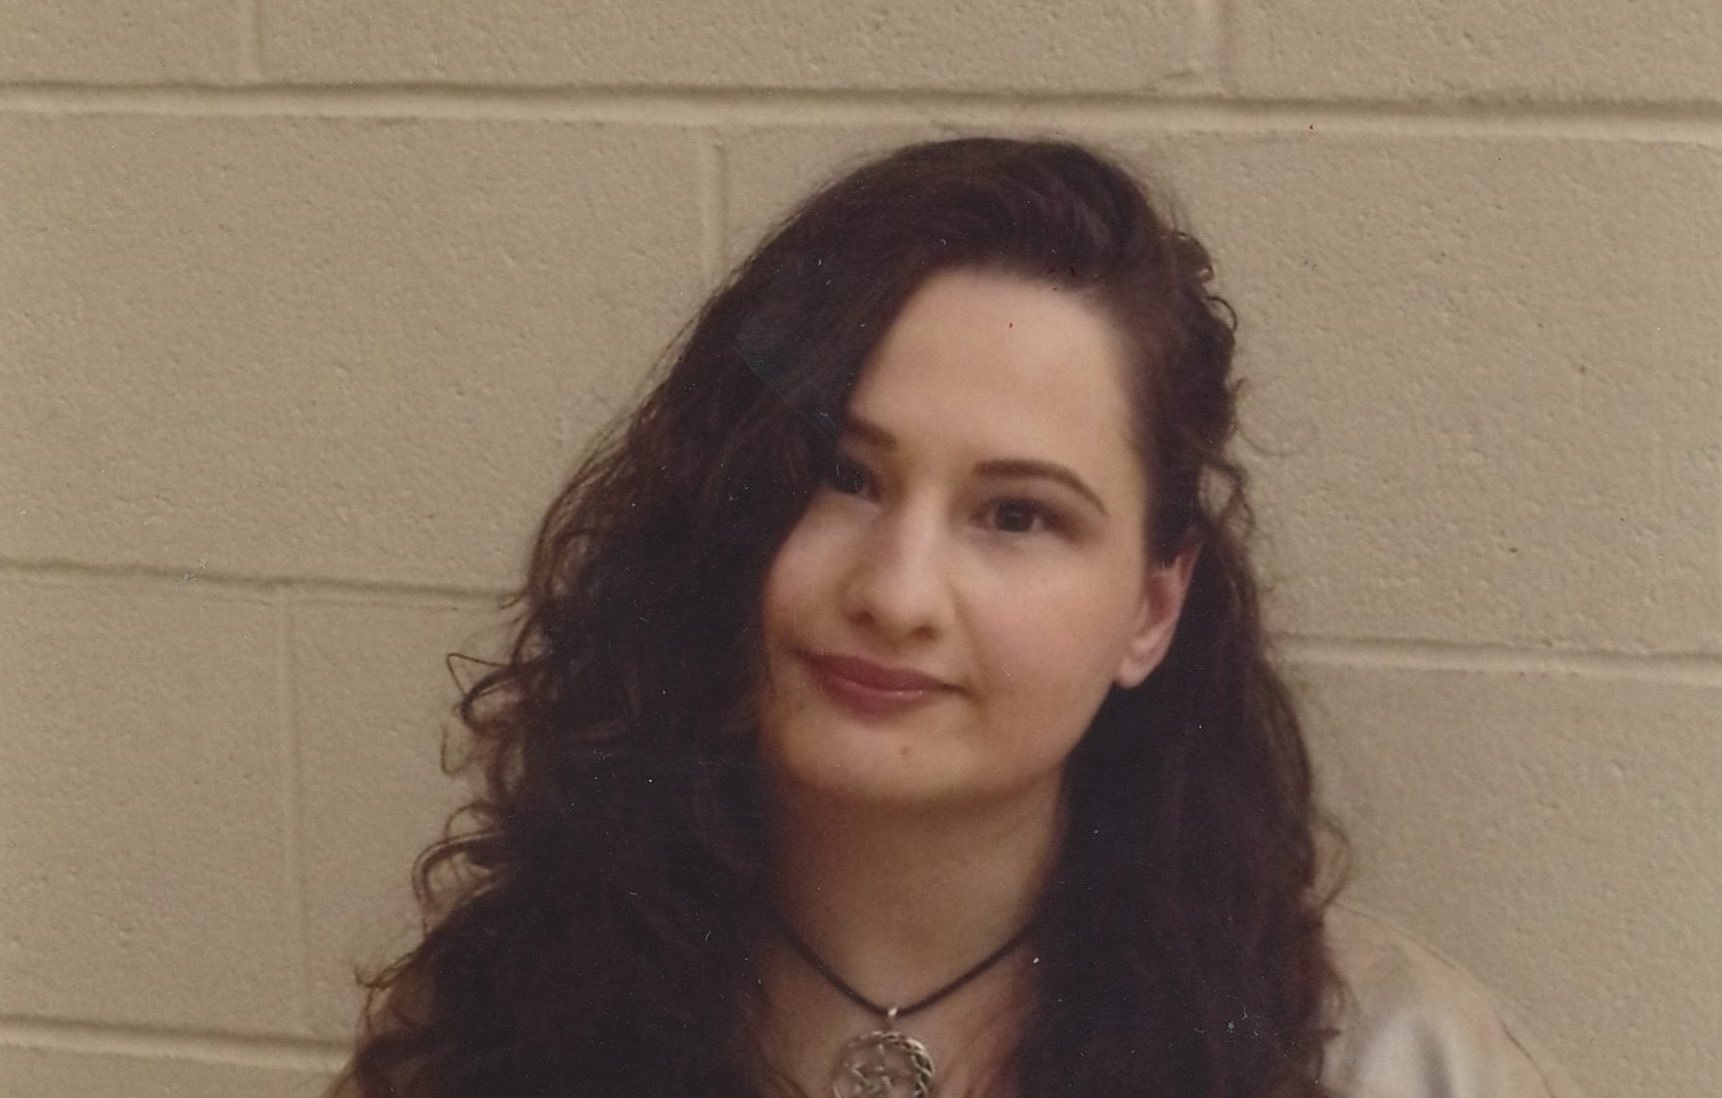 Smiling photo of Gypsy Rose Blanchard in prison